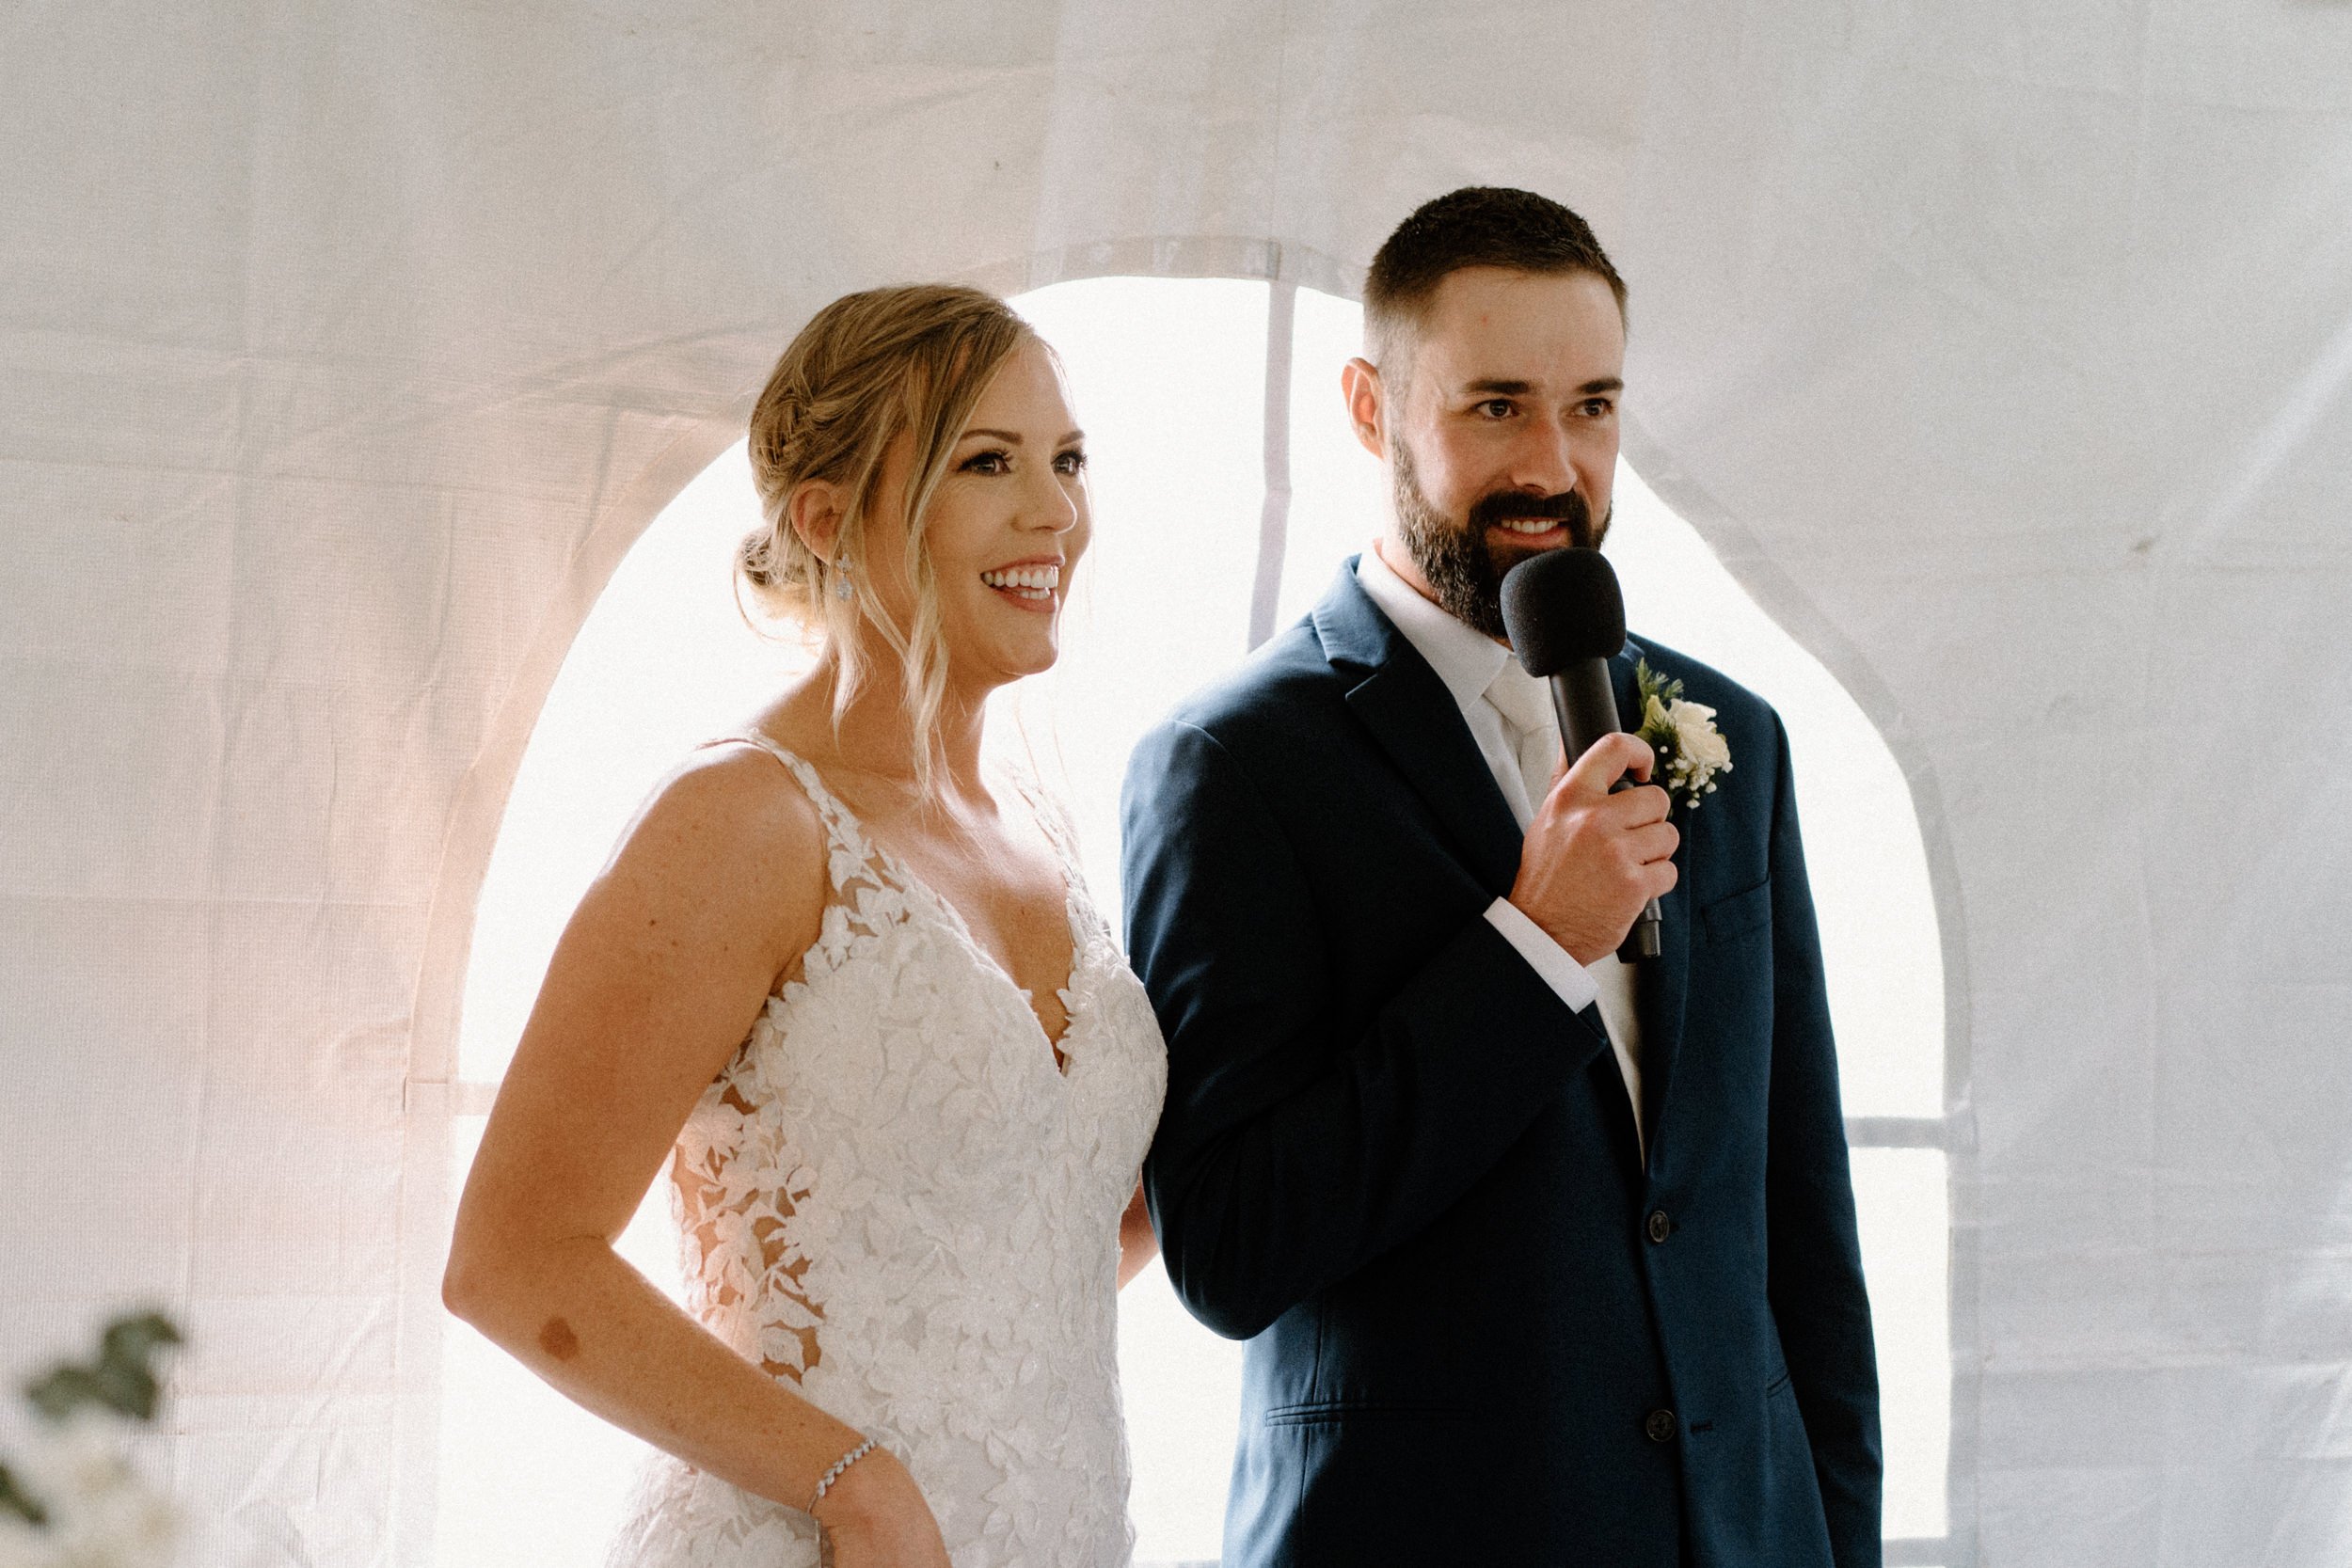 Bride and groom make a speech to their wedding guests